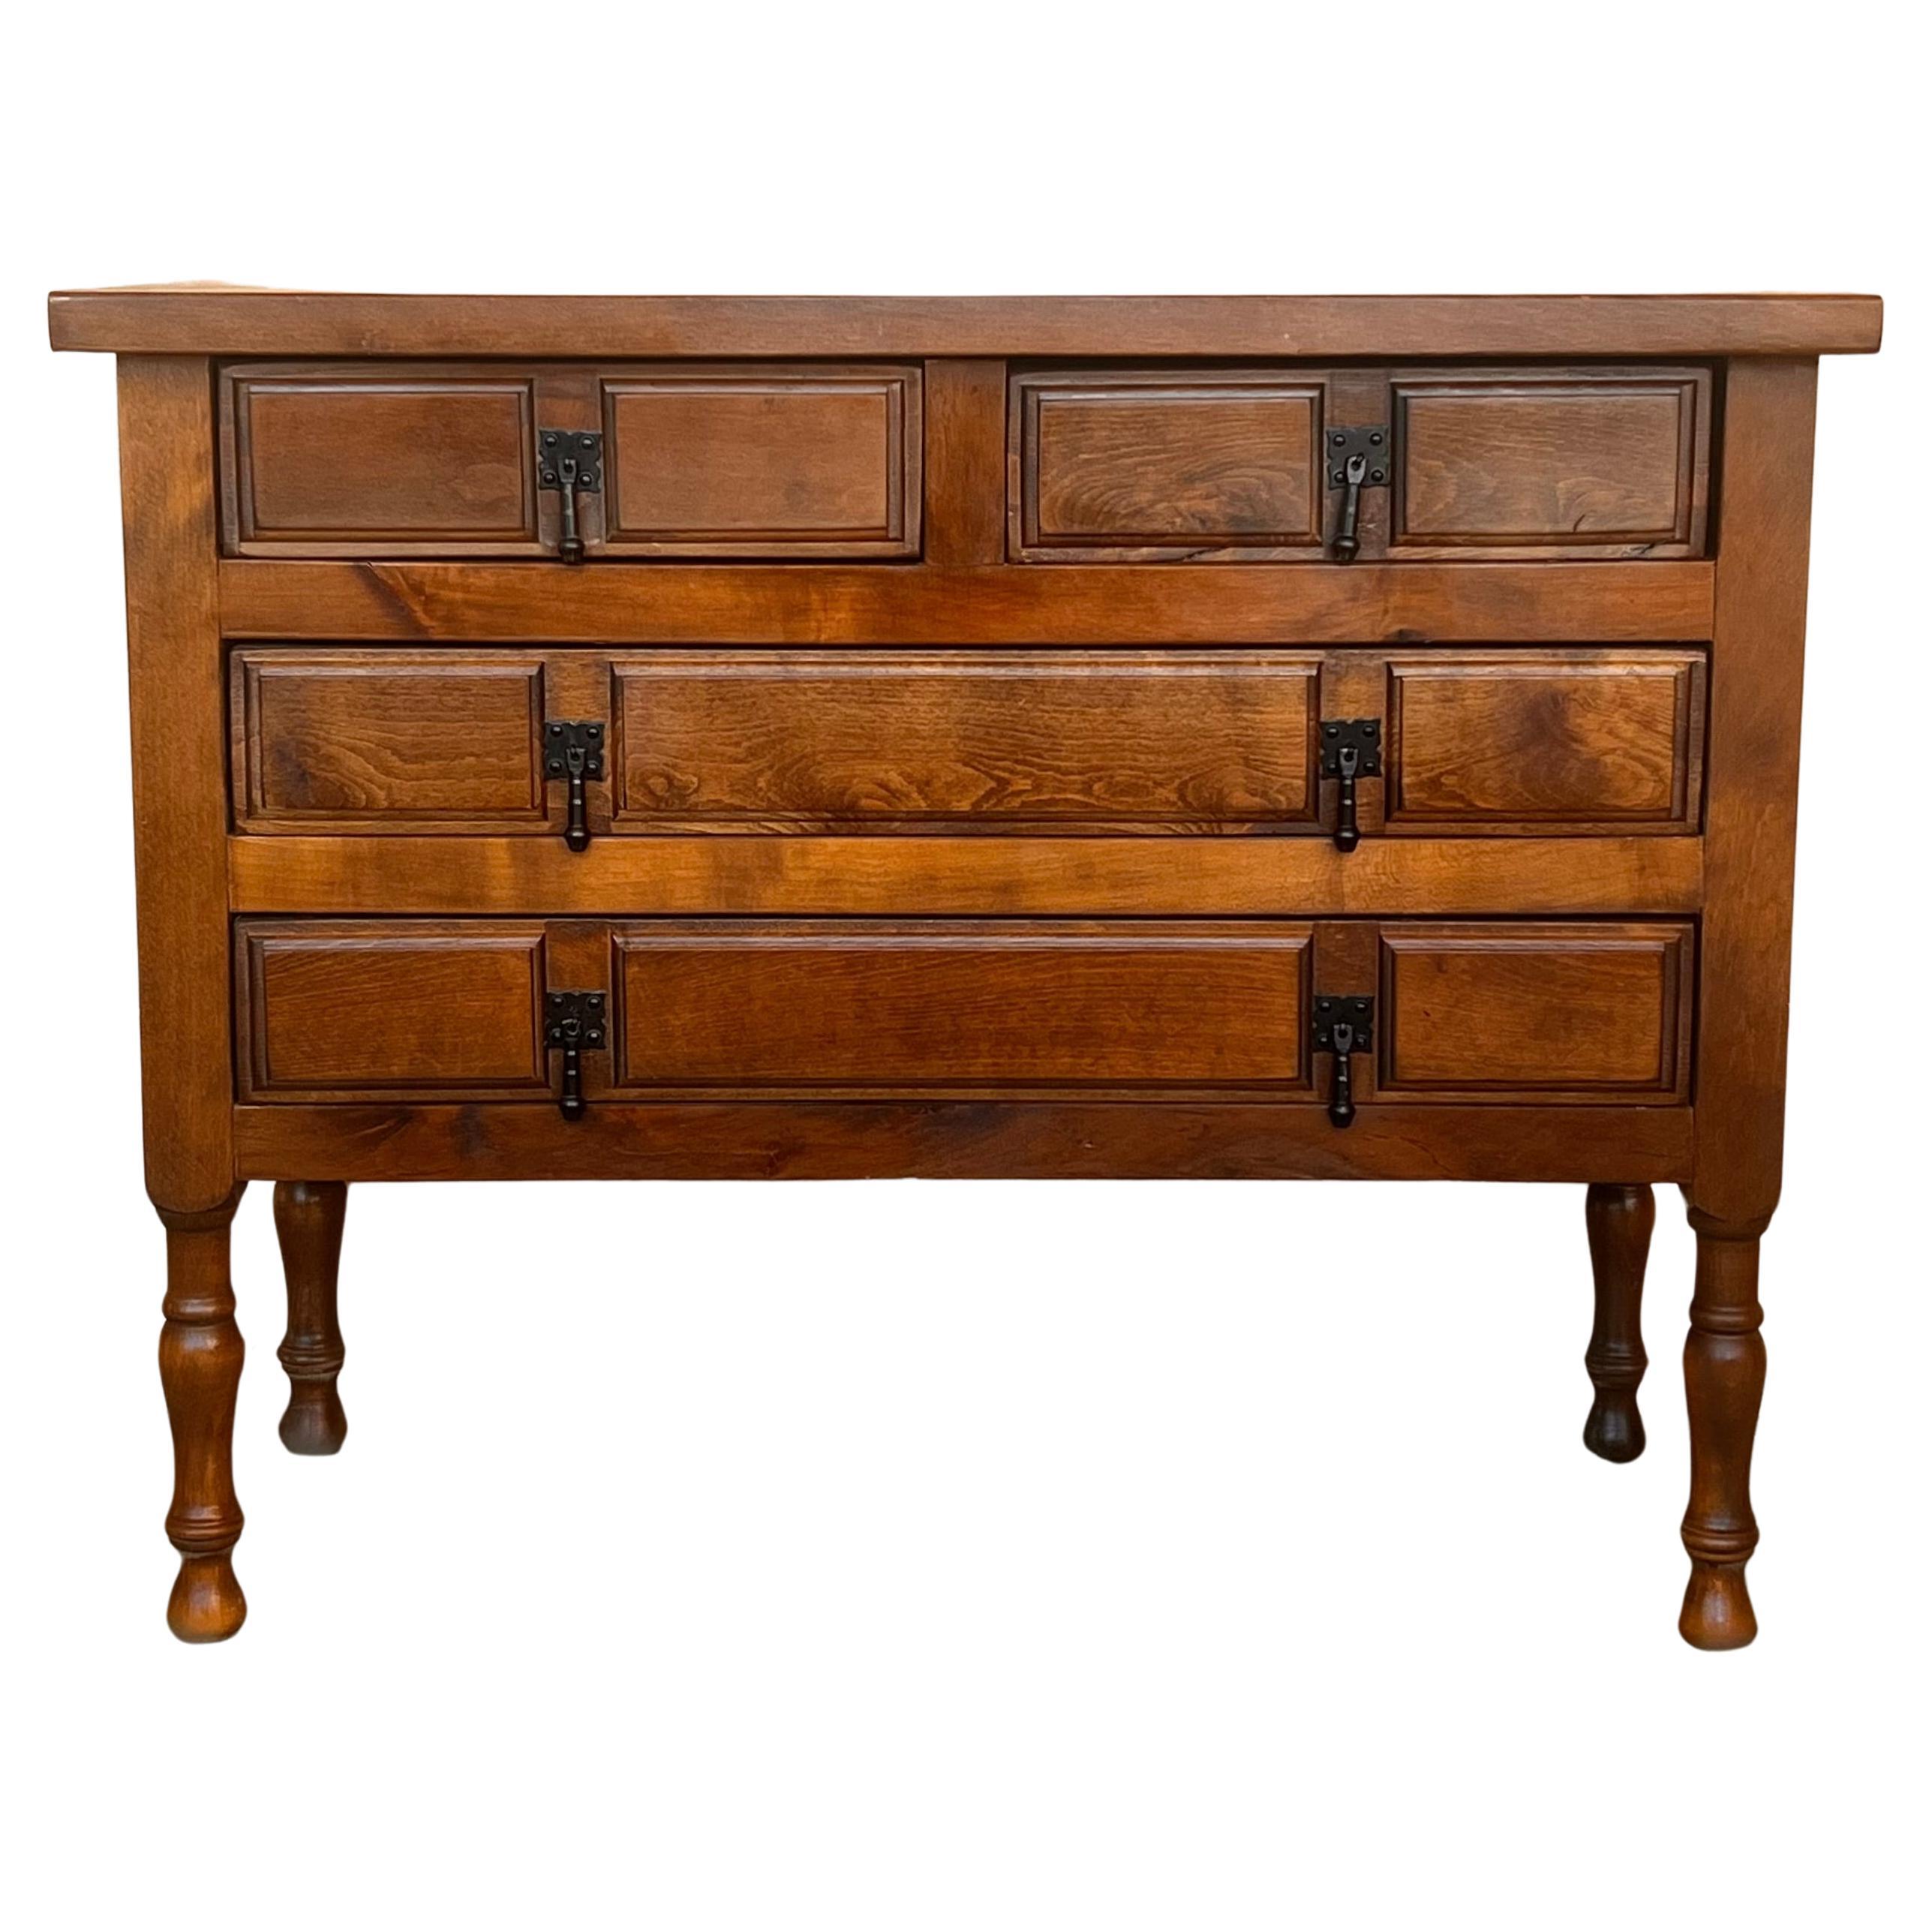 19th Century Catalan Spanish Carved Walnut Console Sofa Table, Three Drawers For Sale